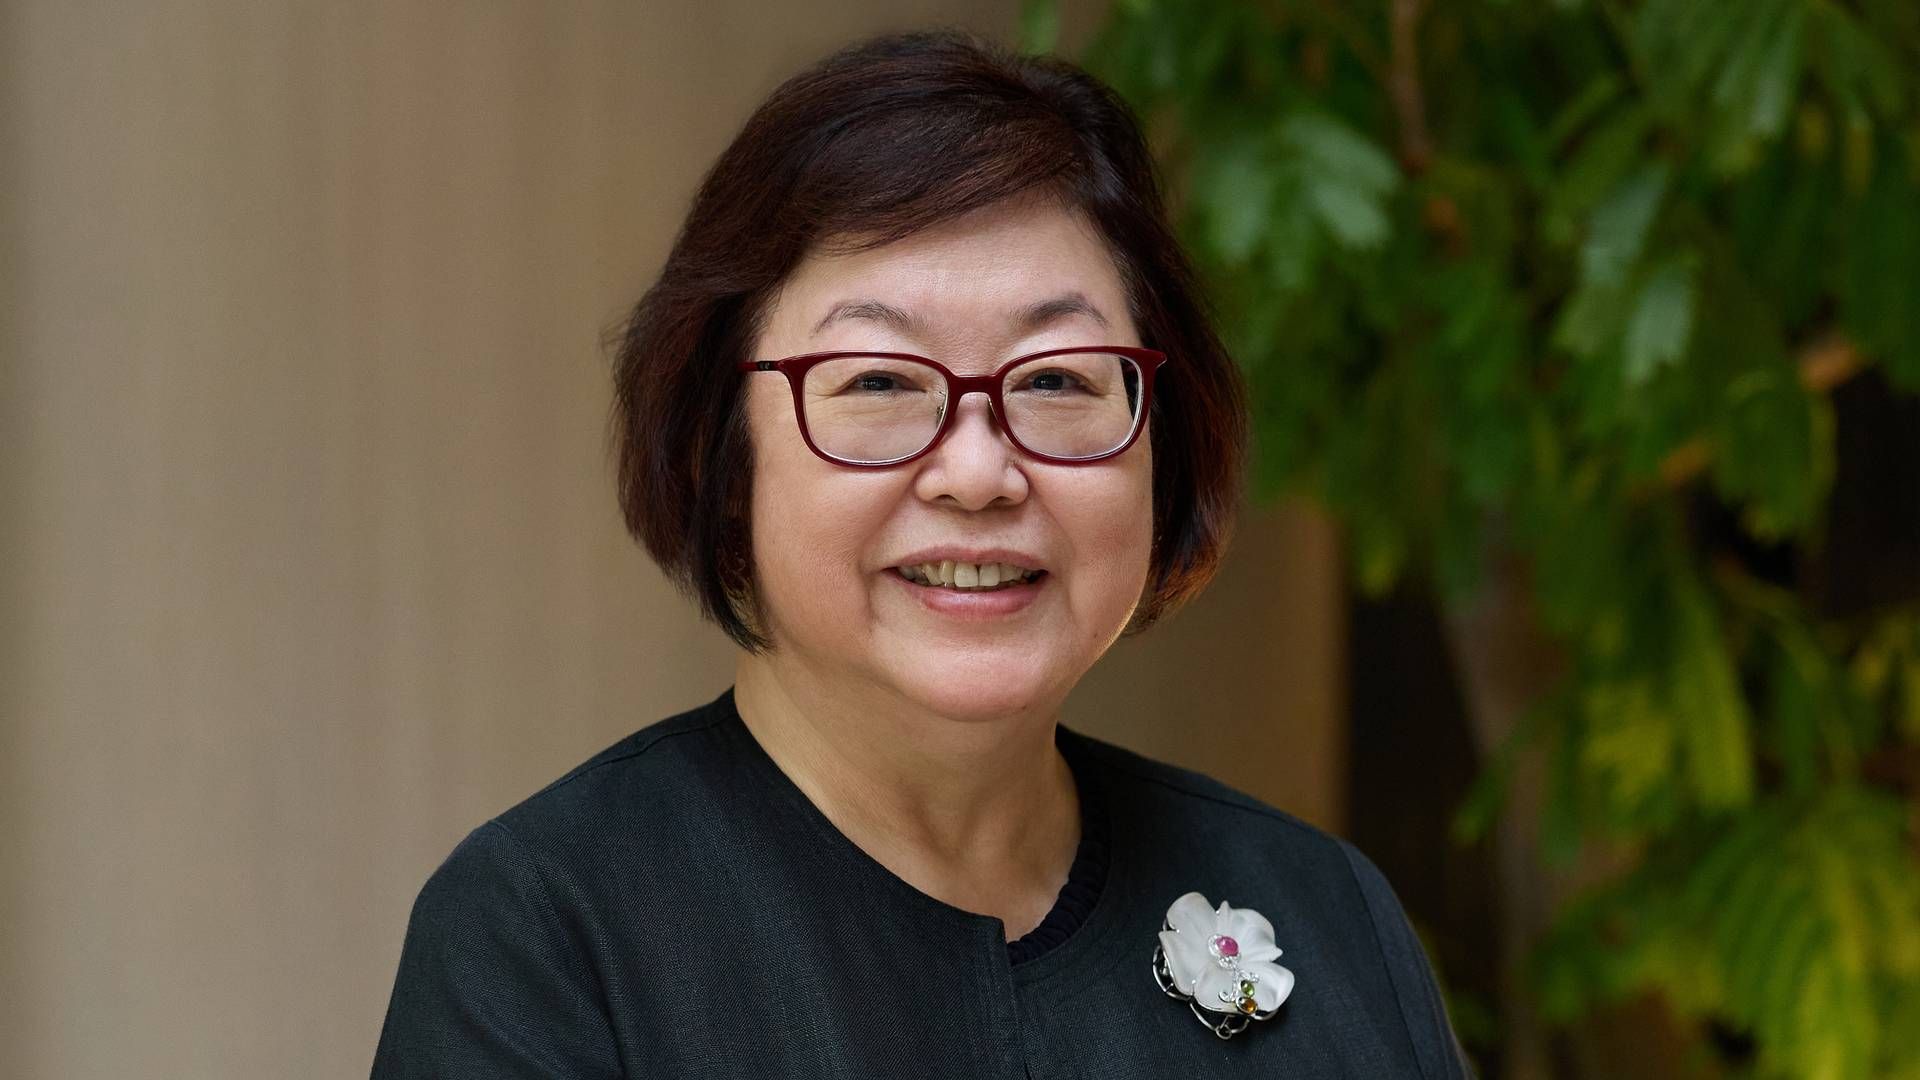 "Shipping is a sector where the relationships formed amongst the community are actually very strong. We become friends, so we laugh together, we joke together. At the same time, when we hear the passing on of a friend, we all feel sad about it," says Executive Director, SMF, Tan Beng Tee | Photo: Celestia Tan